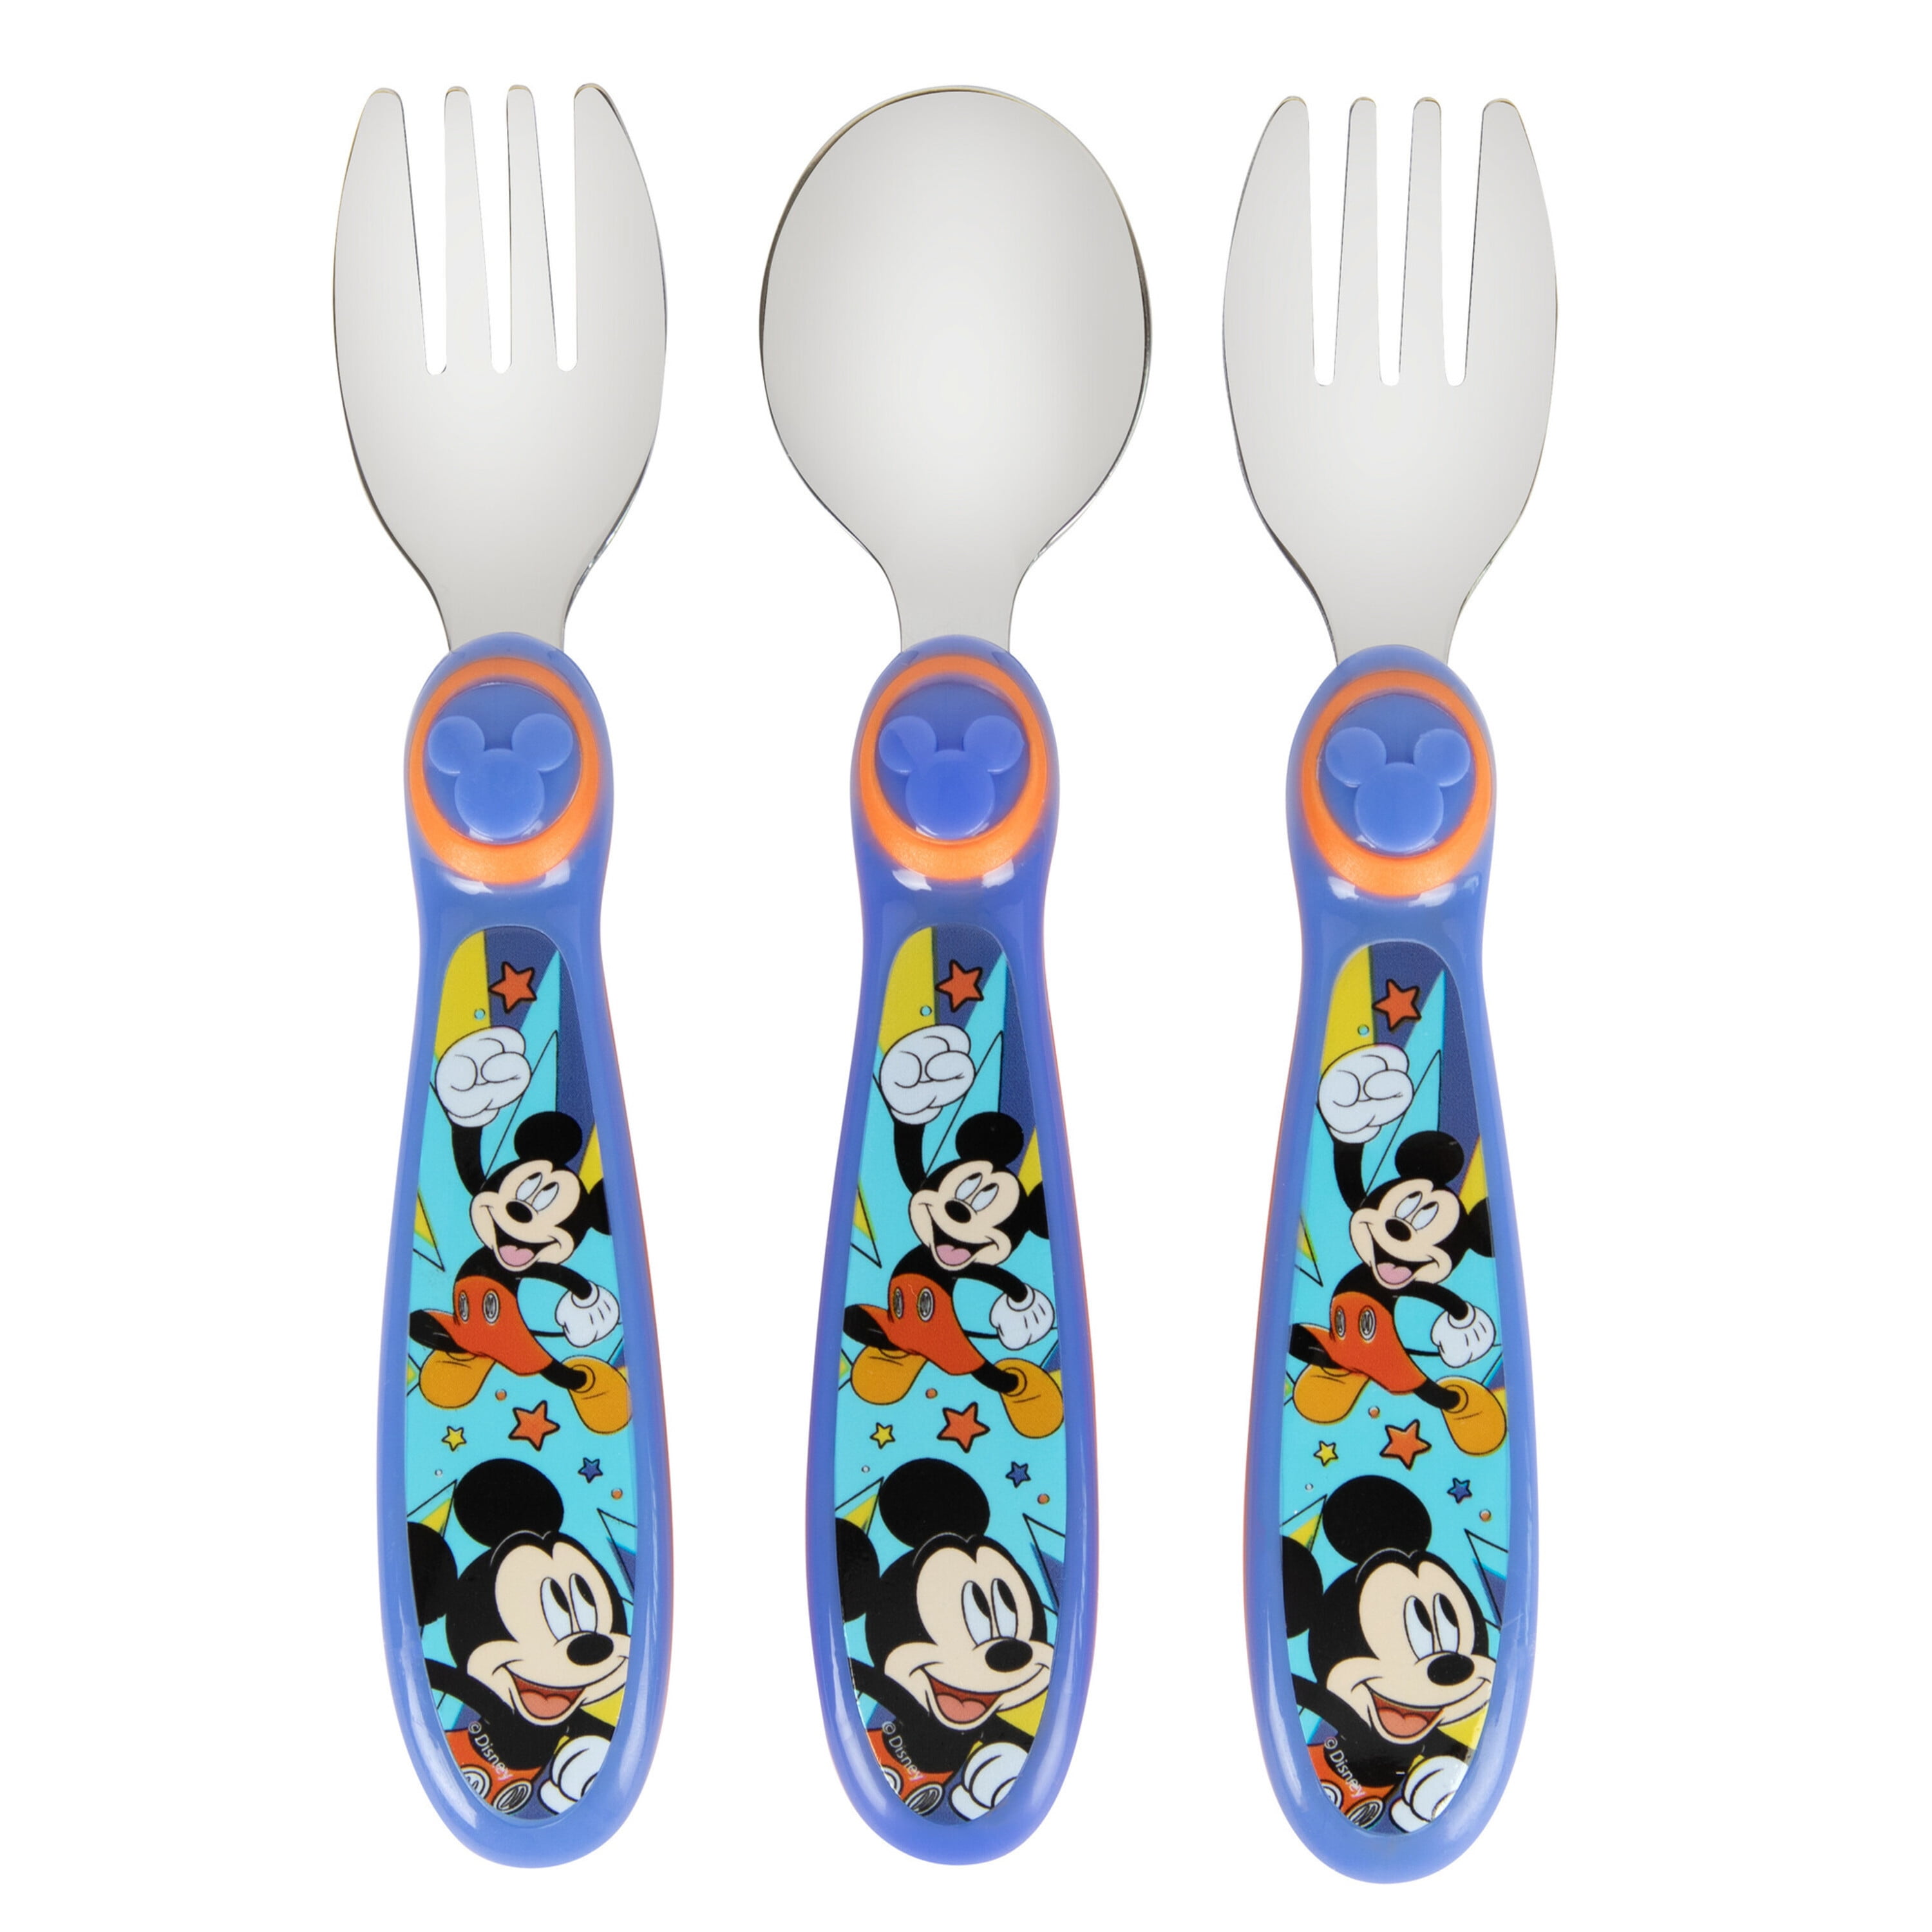 Disney Mickey Mouse Toddler Forks and Spoon Set - 3 Pieces - Dishwasher Safe Utensils